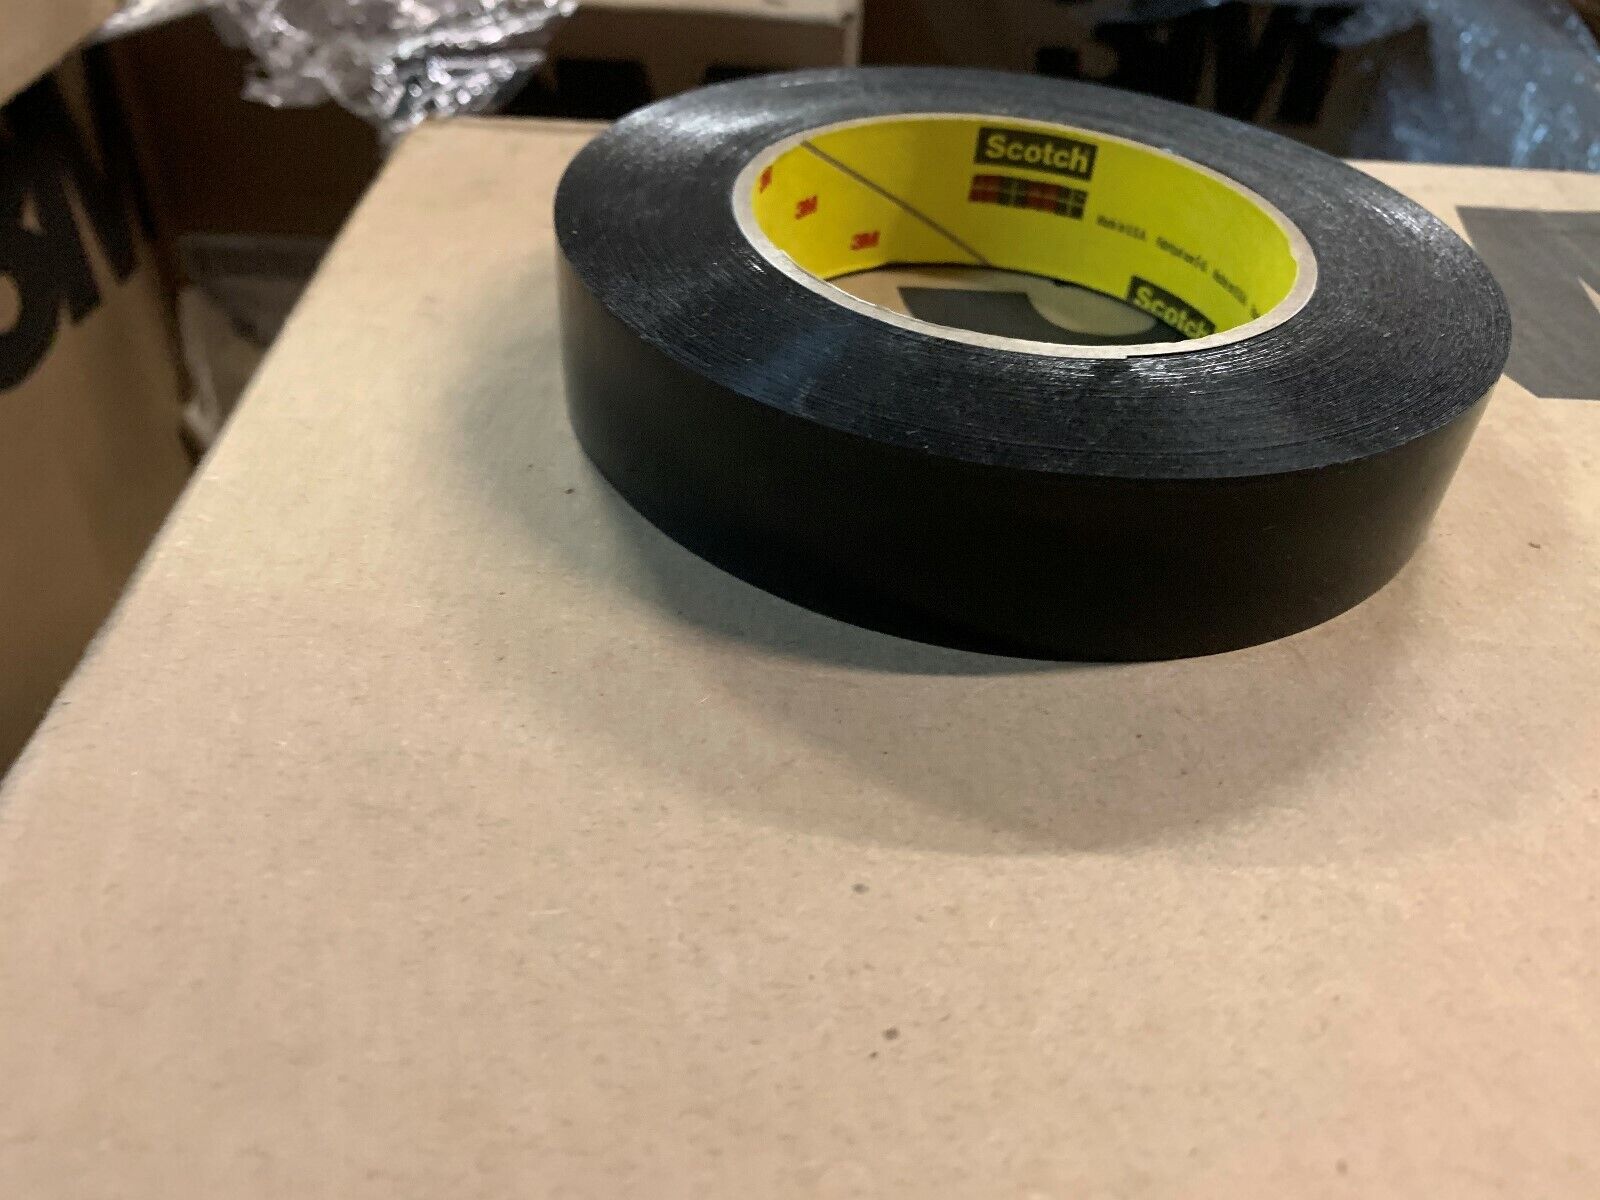 New 3M Roll of Preservation Sealing Tape 481 Black, 1 inch x 36 yd, 